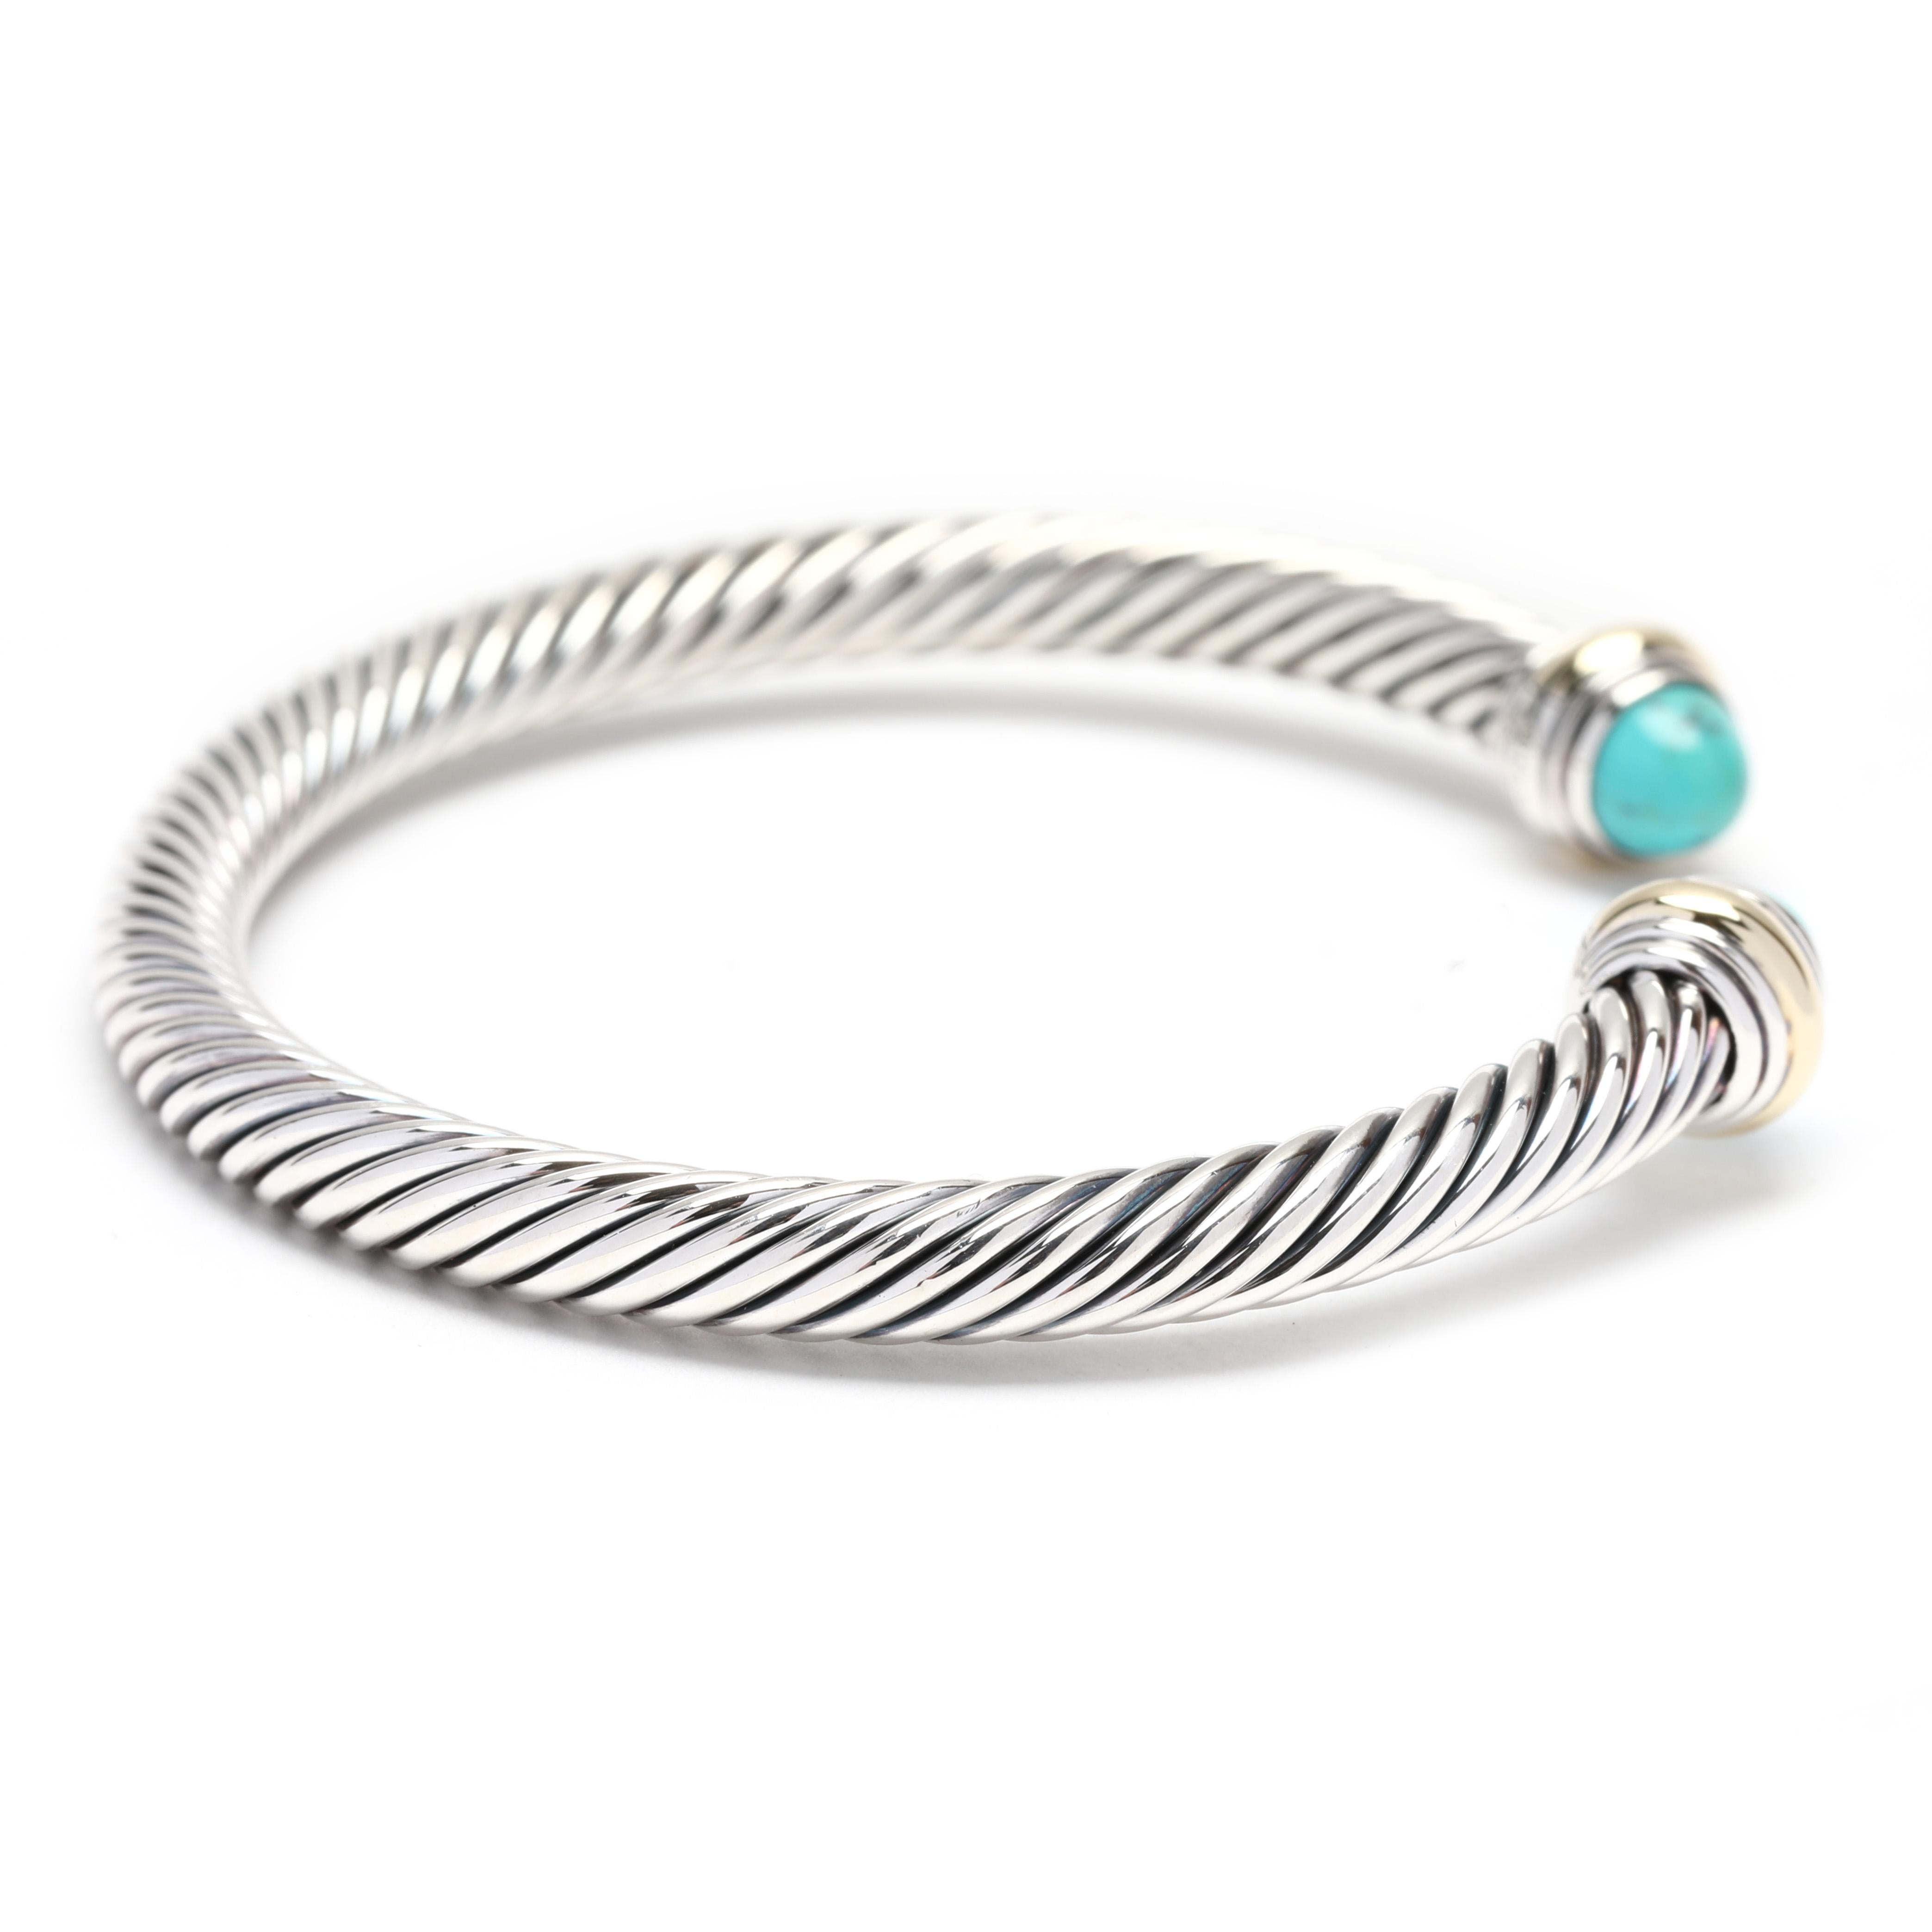 This eye-catching David Yurman Cable Classics Turquoise Cuff Bracelet is sure to make a statement! This luxurious bracelet is crafted of 14K yellow gold and sterling silver and features a medium turquoise cabochon at the center of the cuff. The